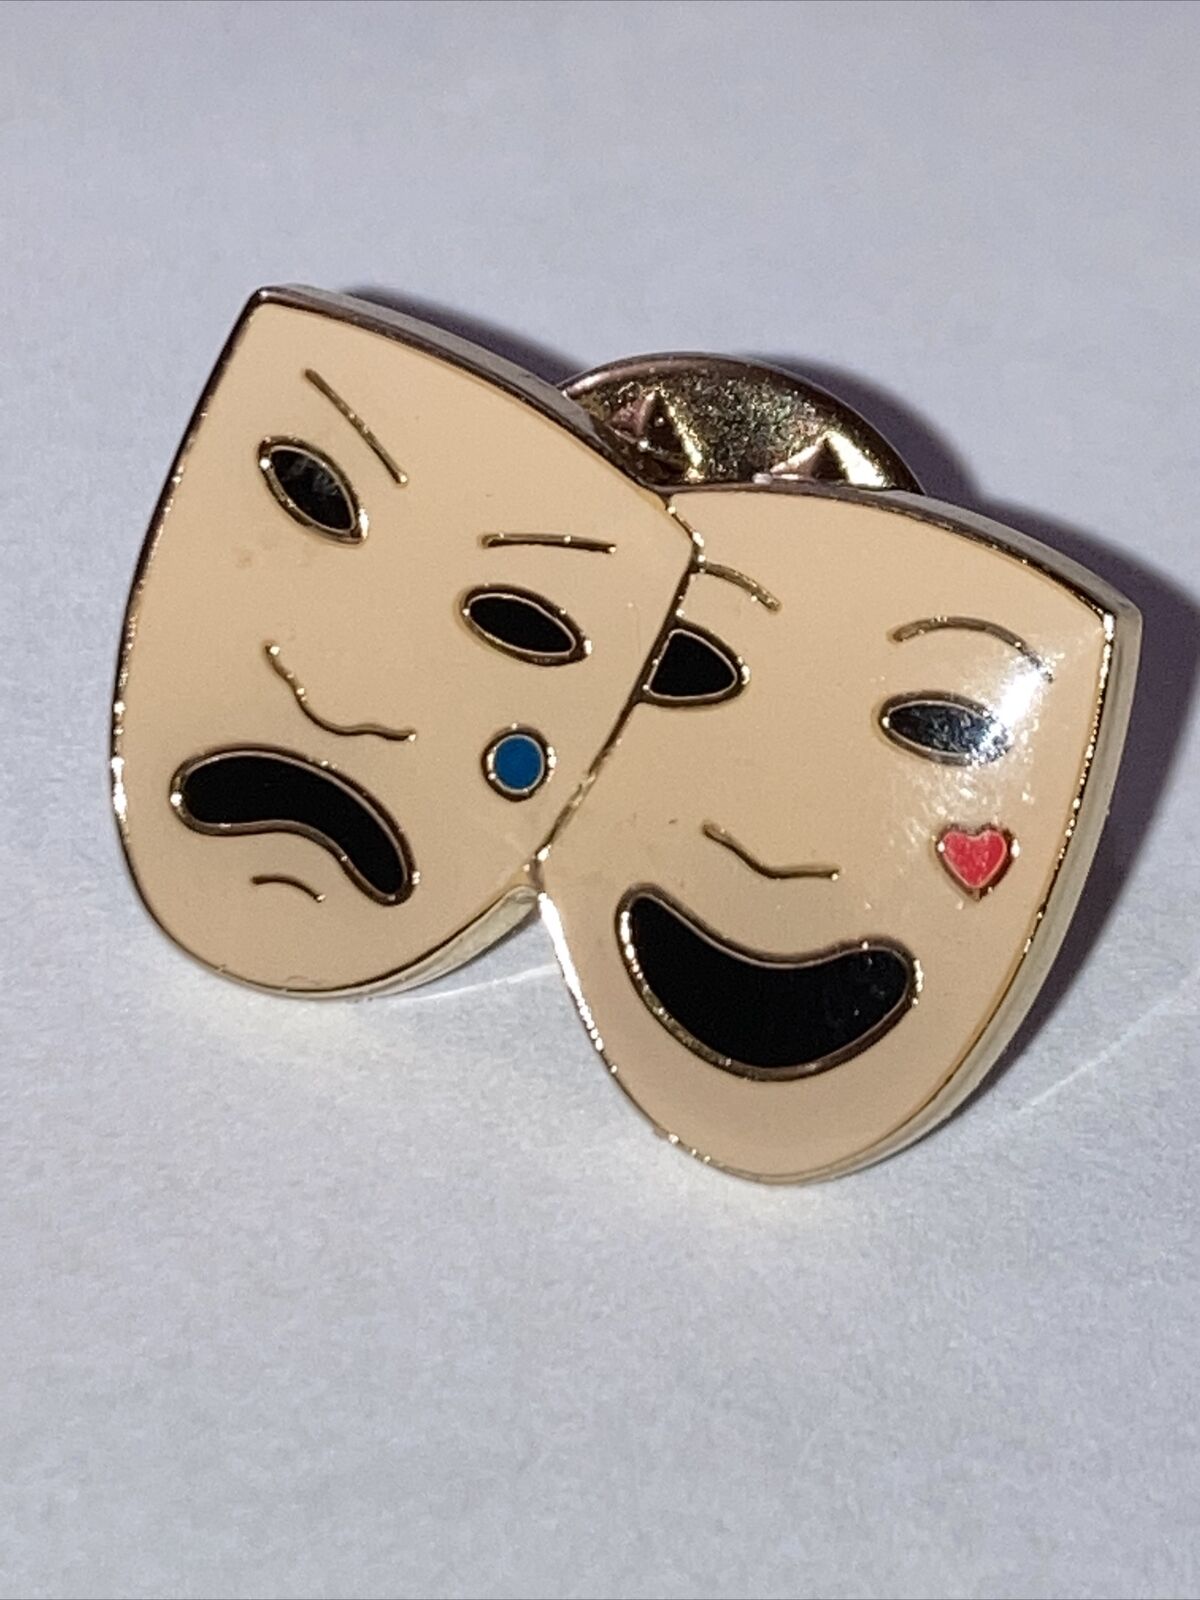 BURBERRY LONDON theatrical masks comedy tragedy metal & ENAMEL PIN BADGE brooch